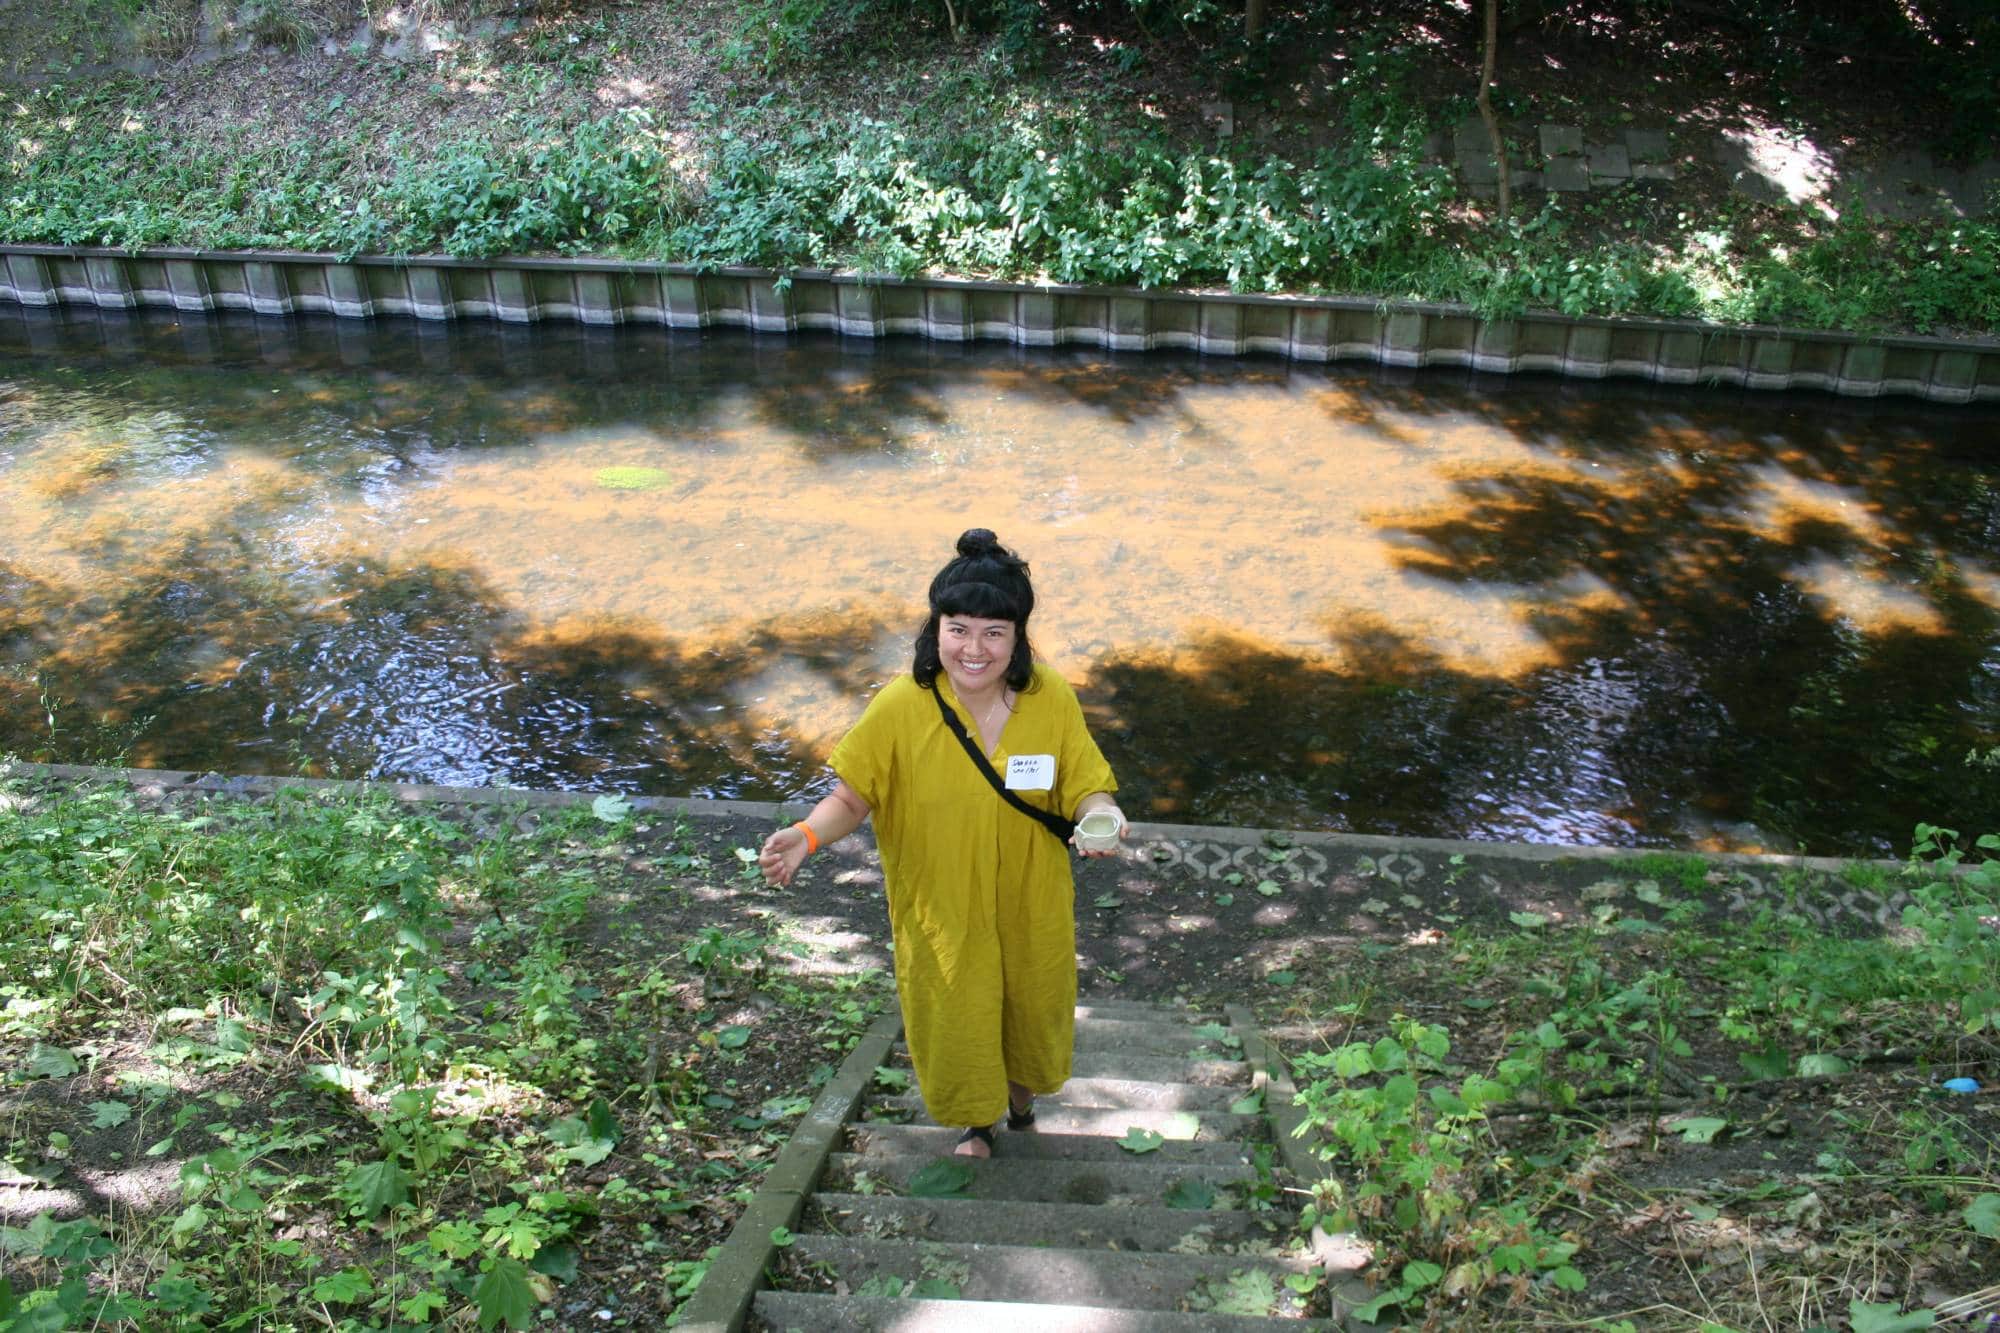 a woman standing on stairs on the bank of a small river or canal